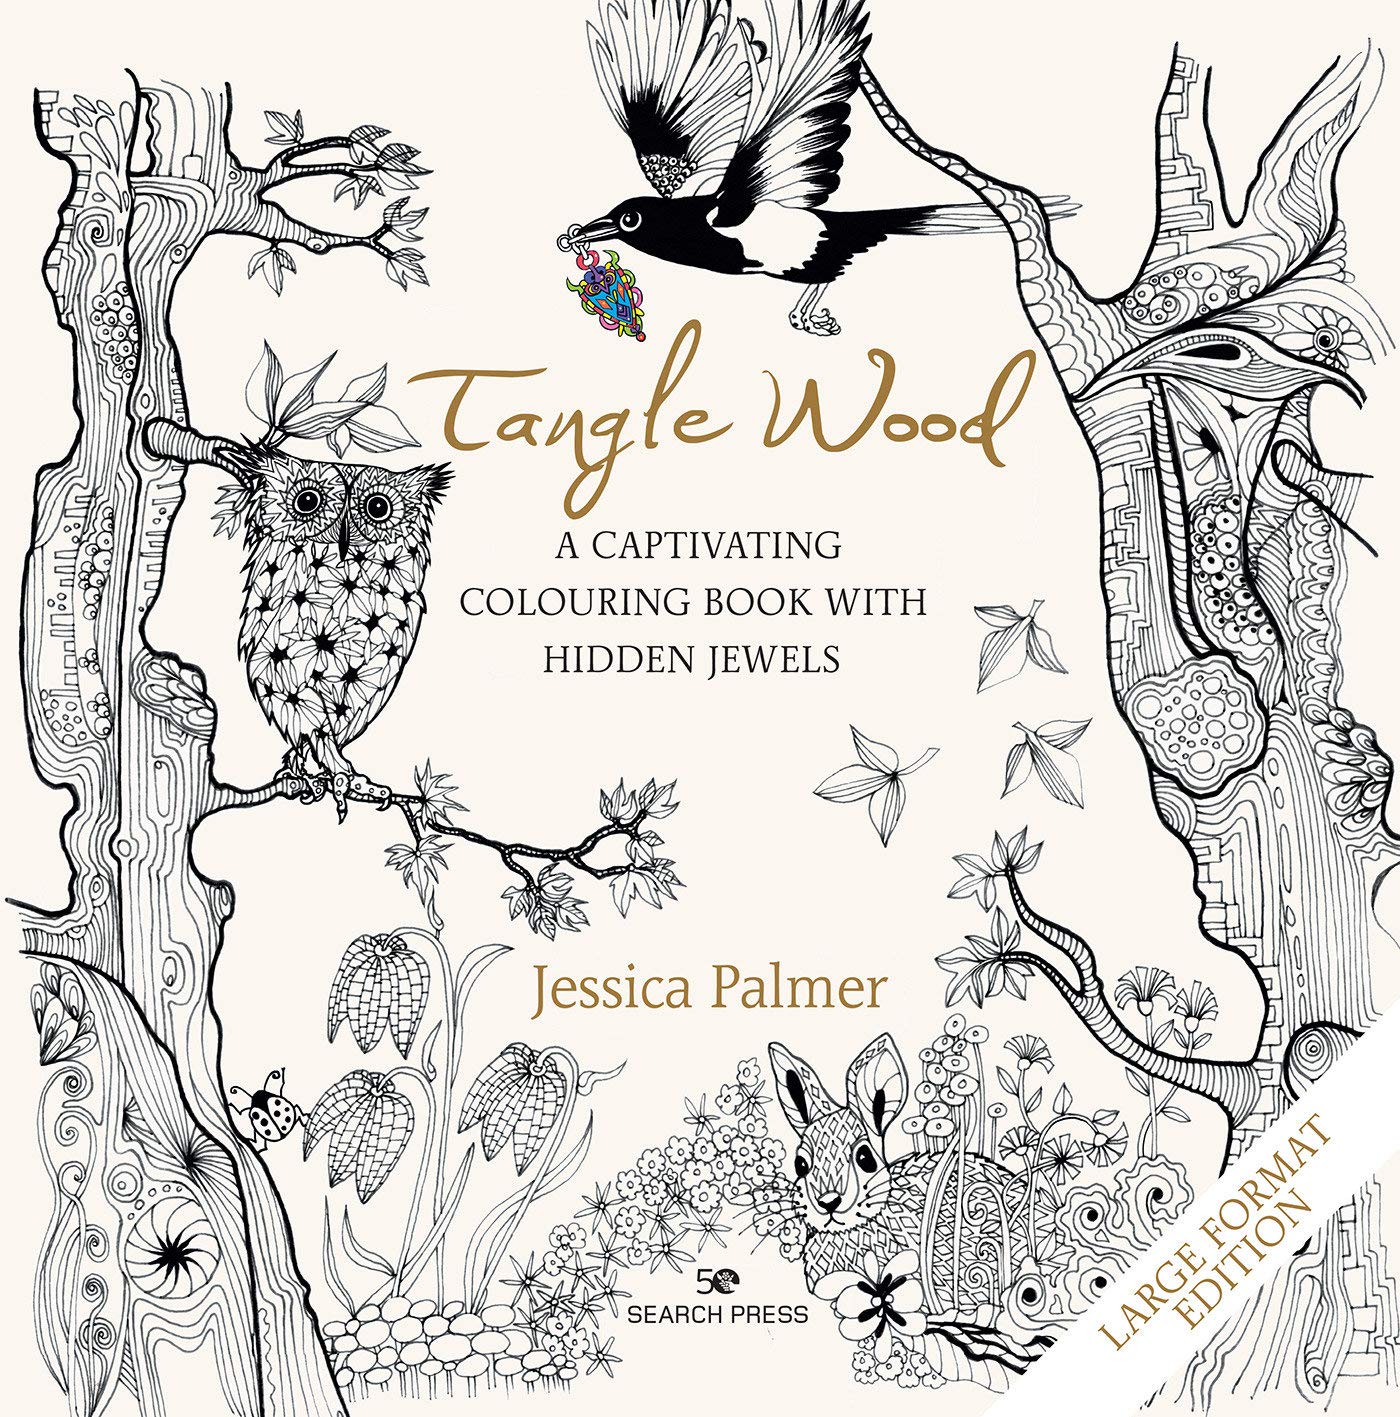 Search Press Books - Tangle Wood Colouring Book - Large Format